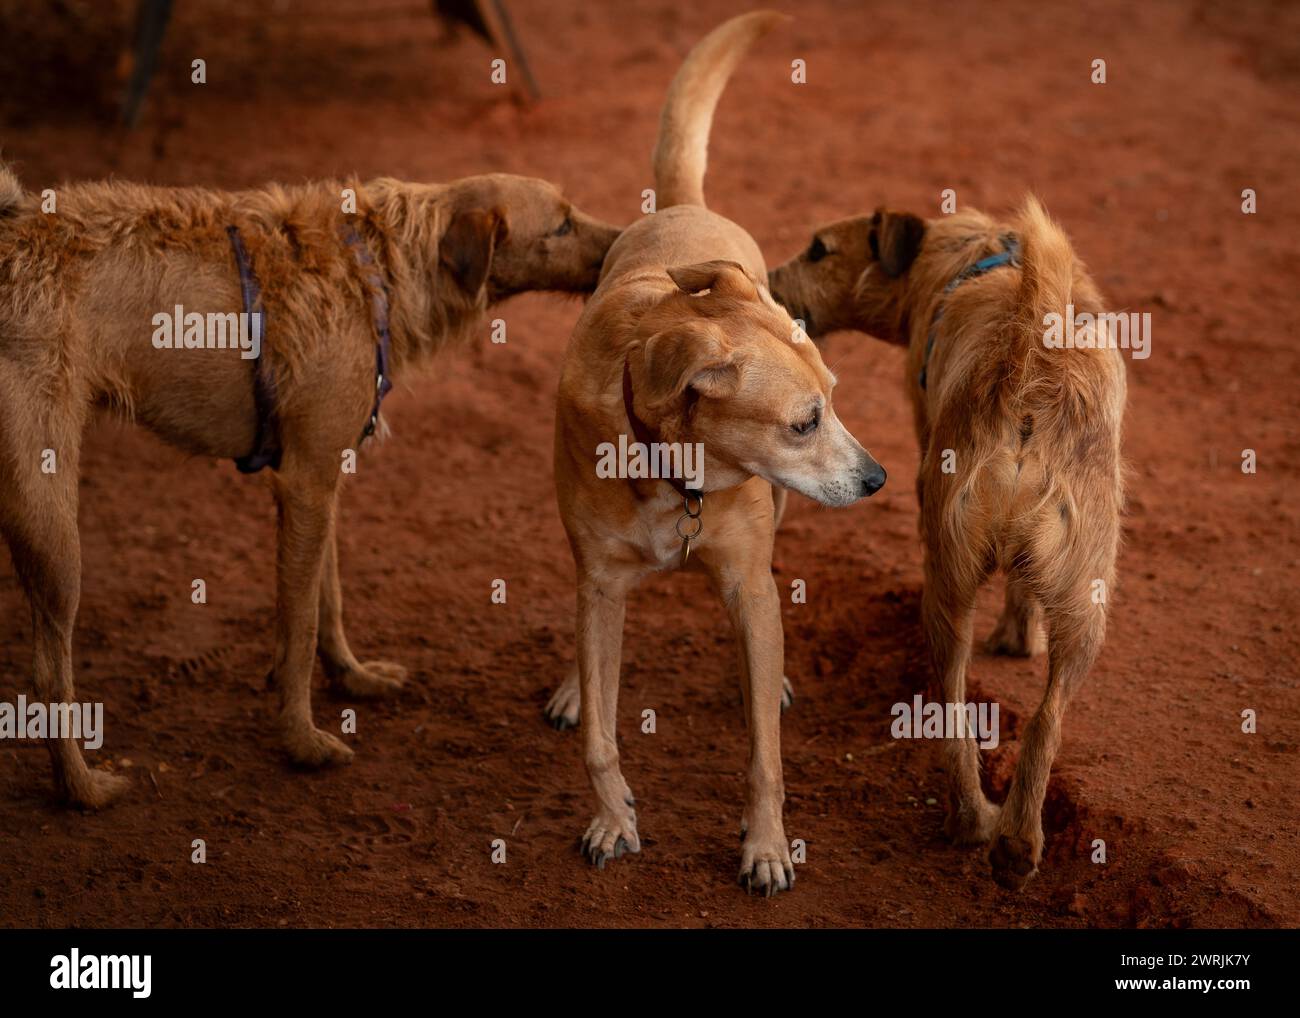 The three dogs standing on a dusty ground Stock Photo